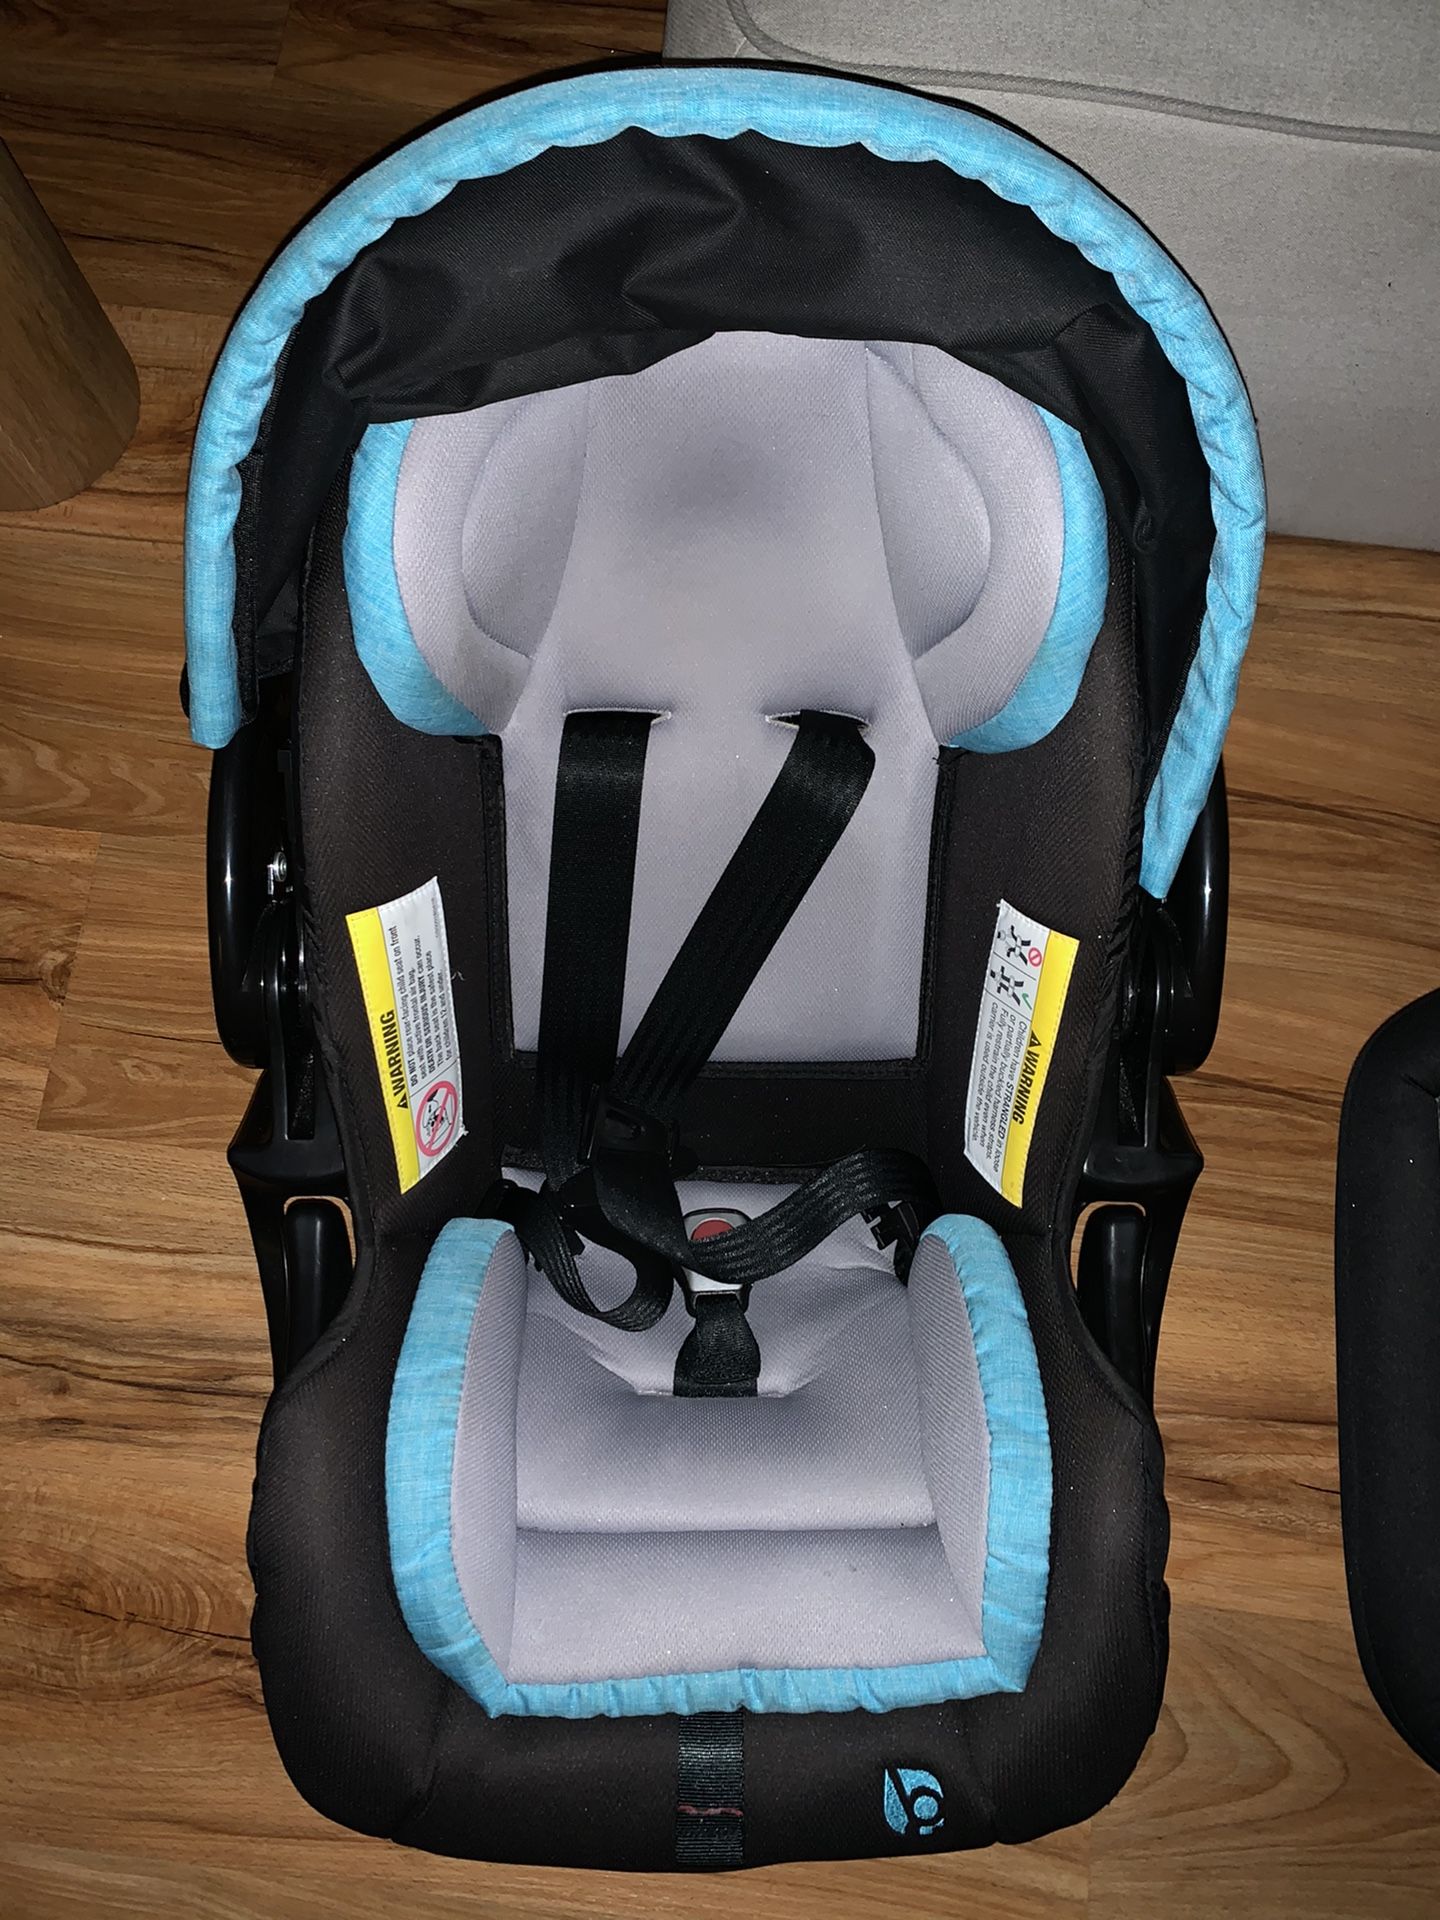 Baby Trend Infant car seat